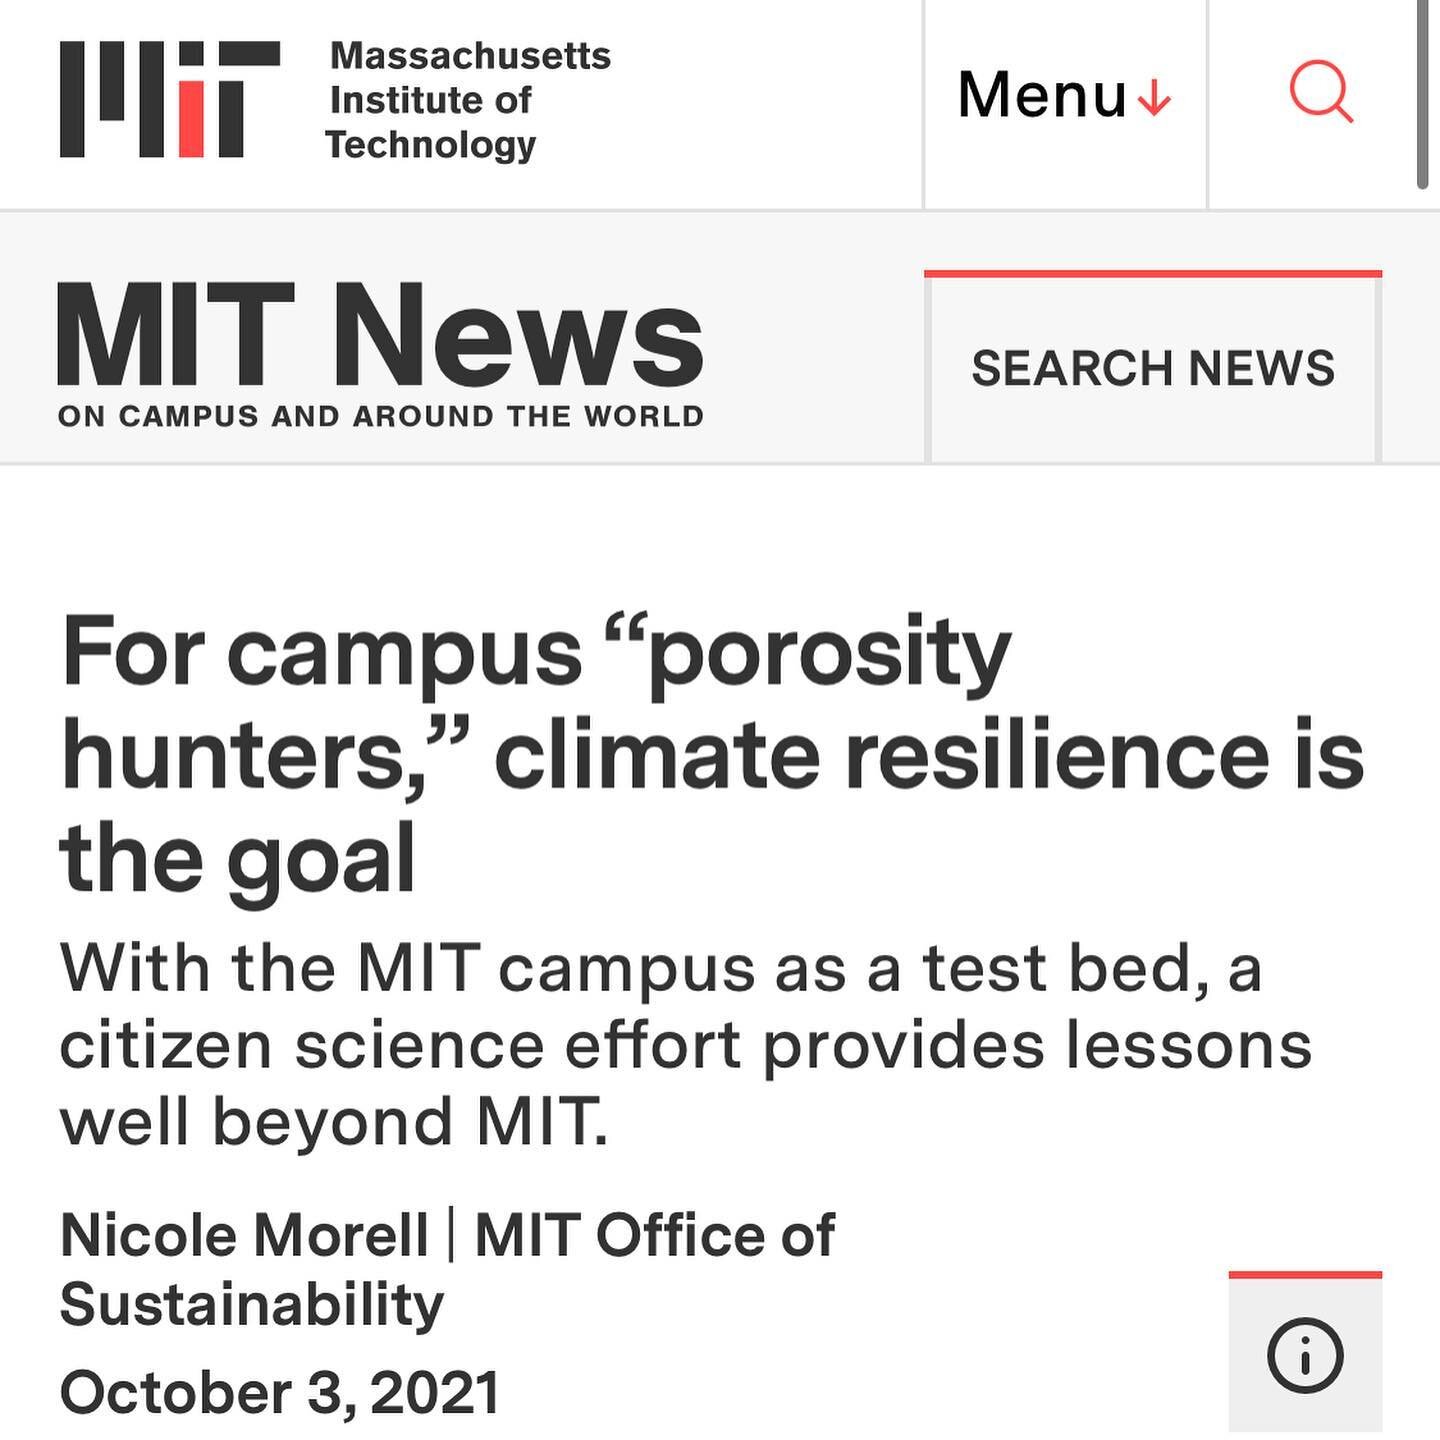 The MIT campus sits on reclaimed land, originally tidal flats. Since reclamation, both the city and the campus have grown at a rapid pace during the past 100 years. With sea-level rise, increased precipitation, and the associated risk of increasing s